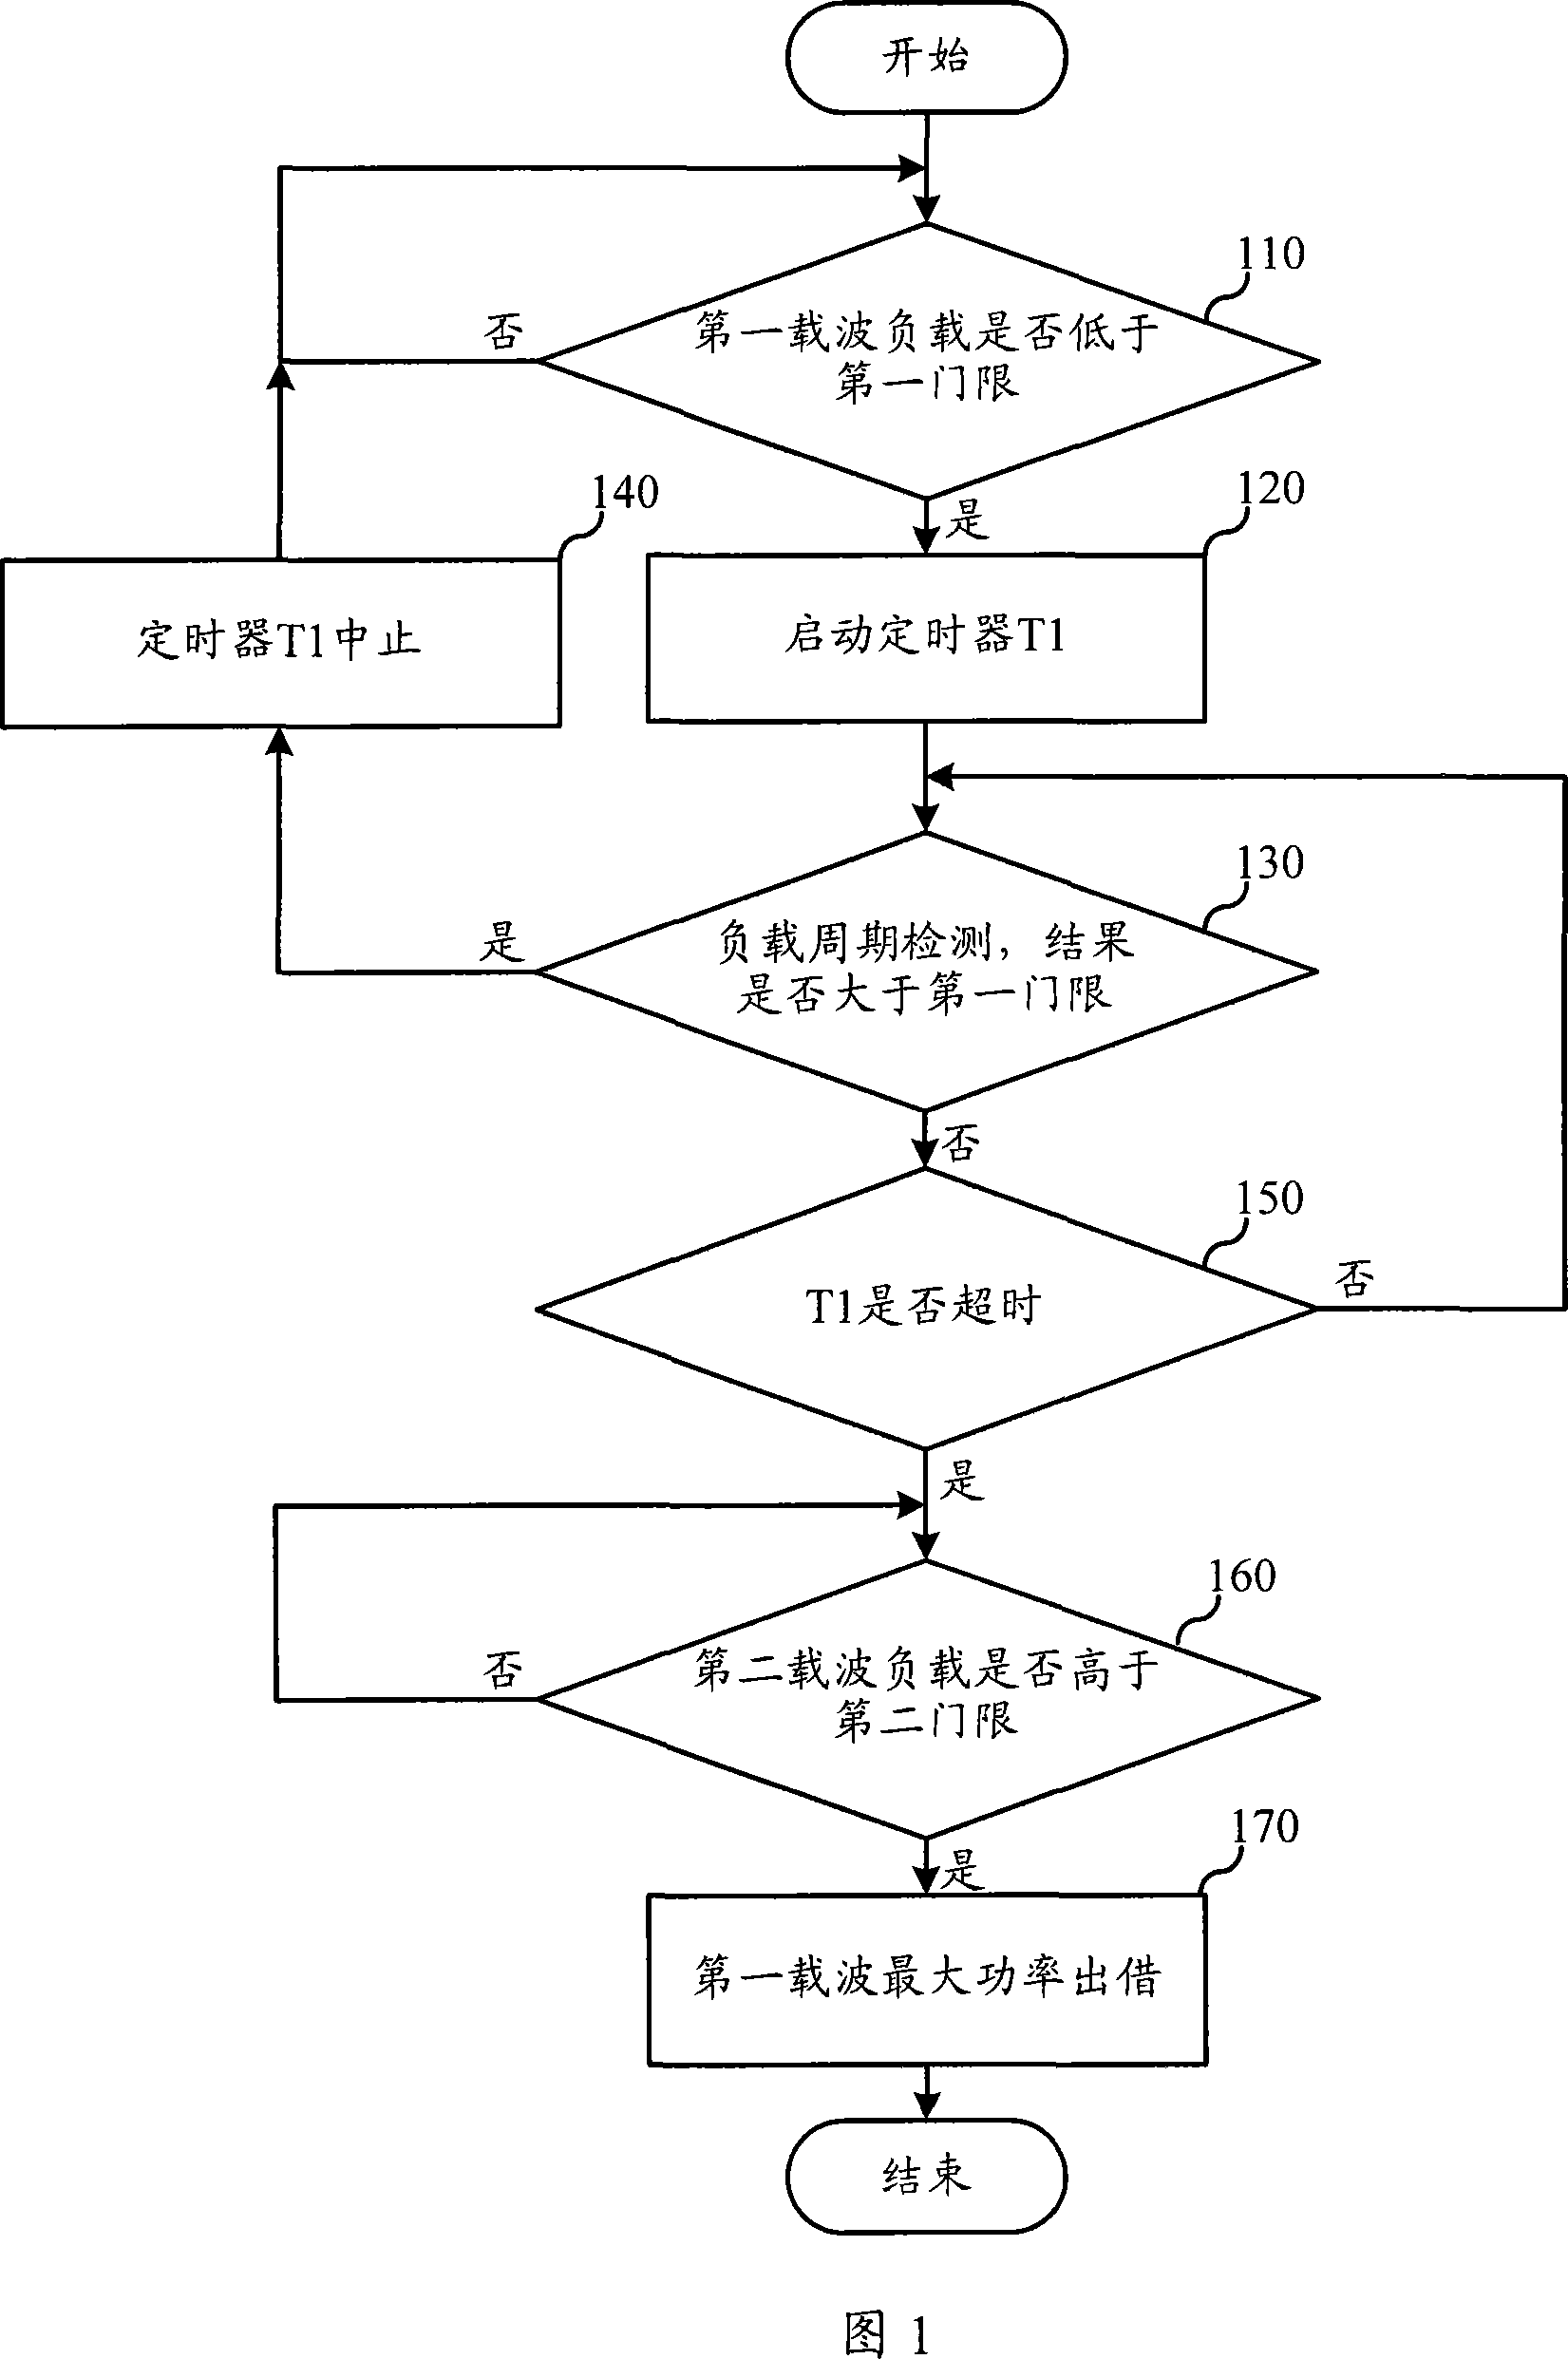 Intercarrier power distribution method and system in a same power amplification